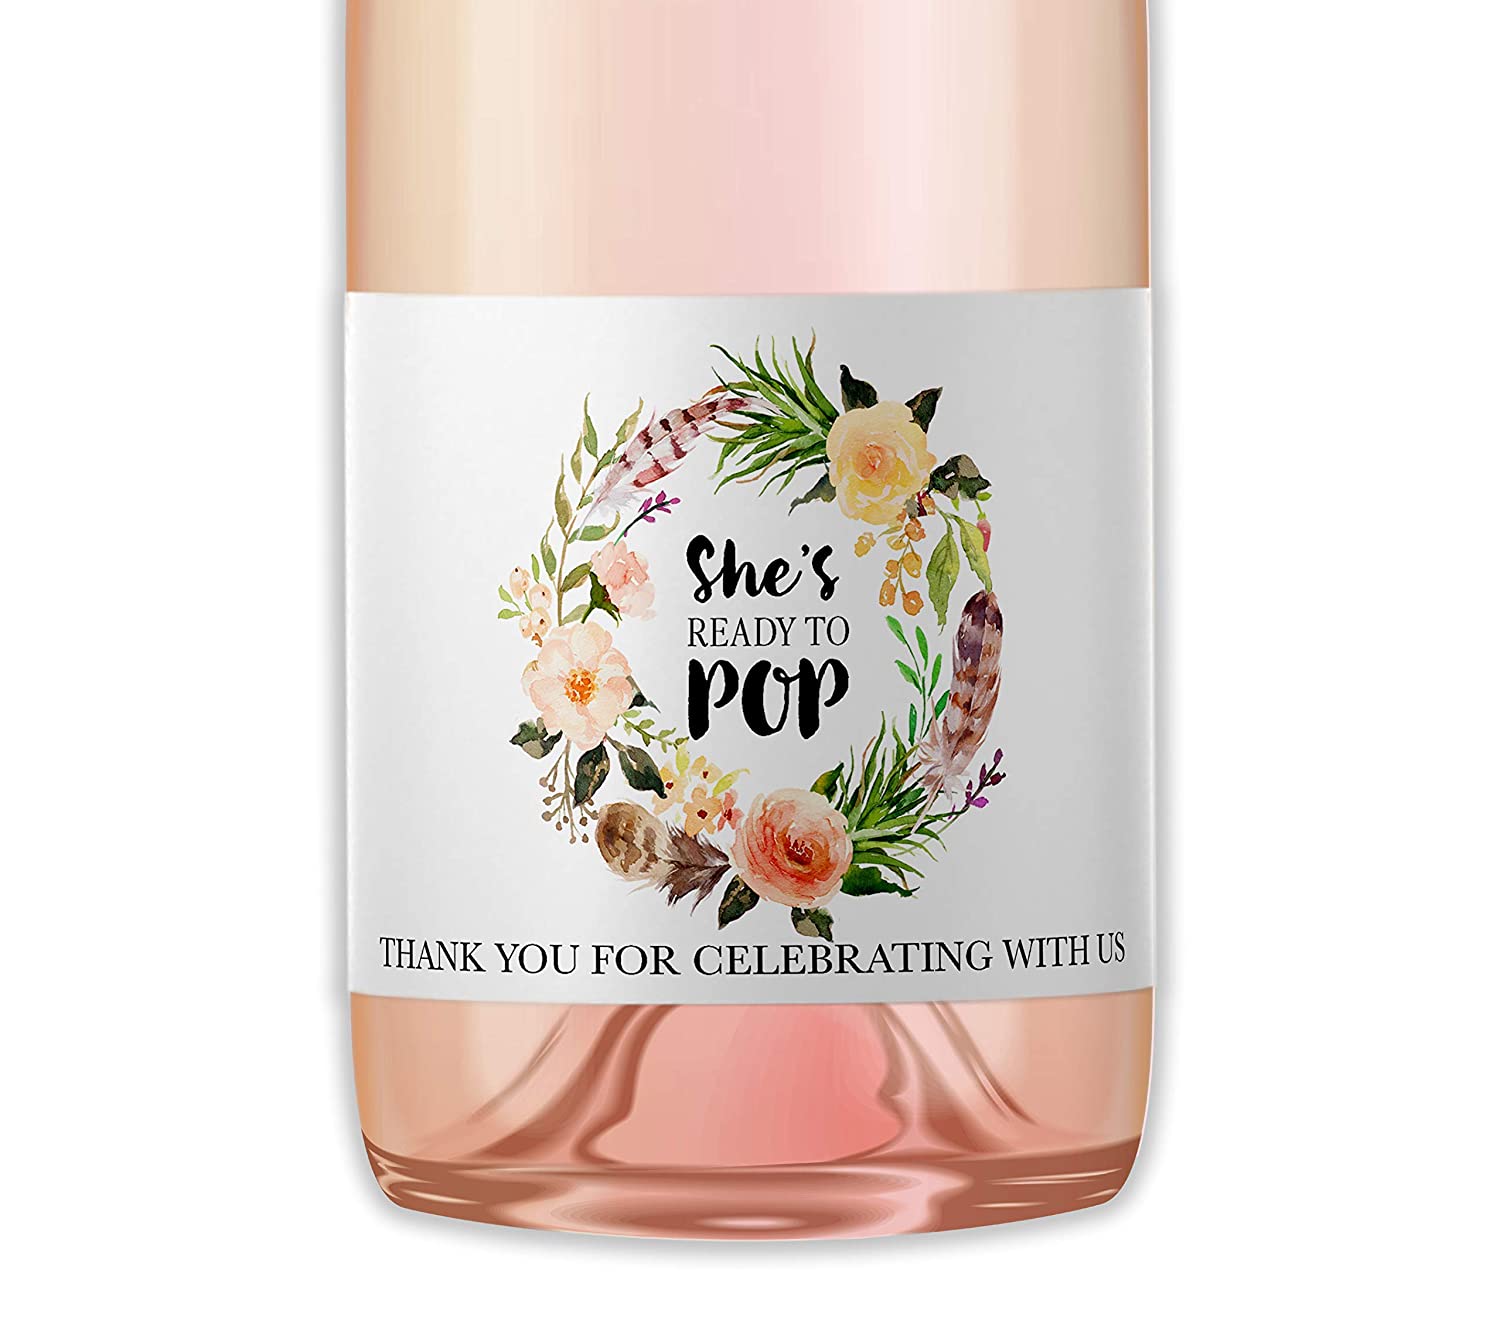 She's Ready To Pop • Bohemian Baby Shower Mini Champagne Labels • SET of 18